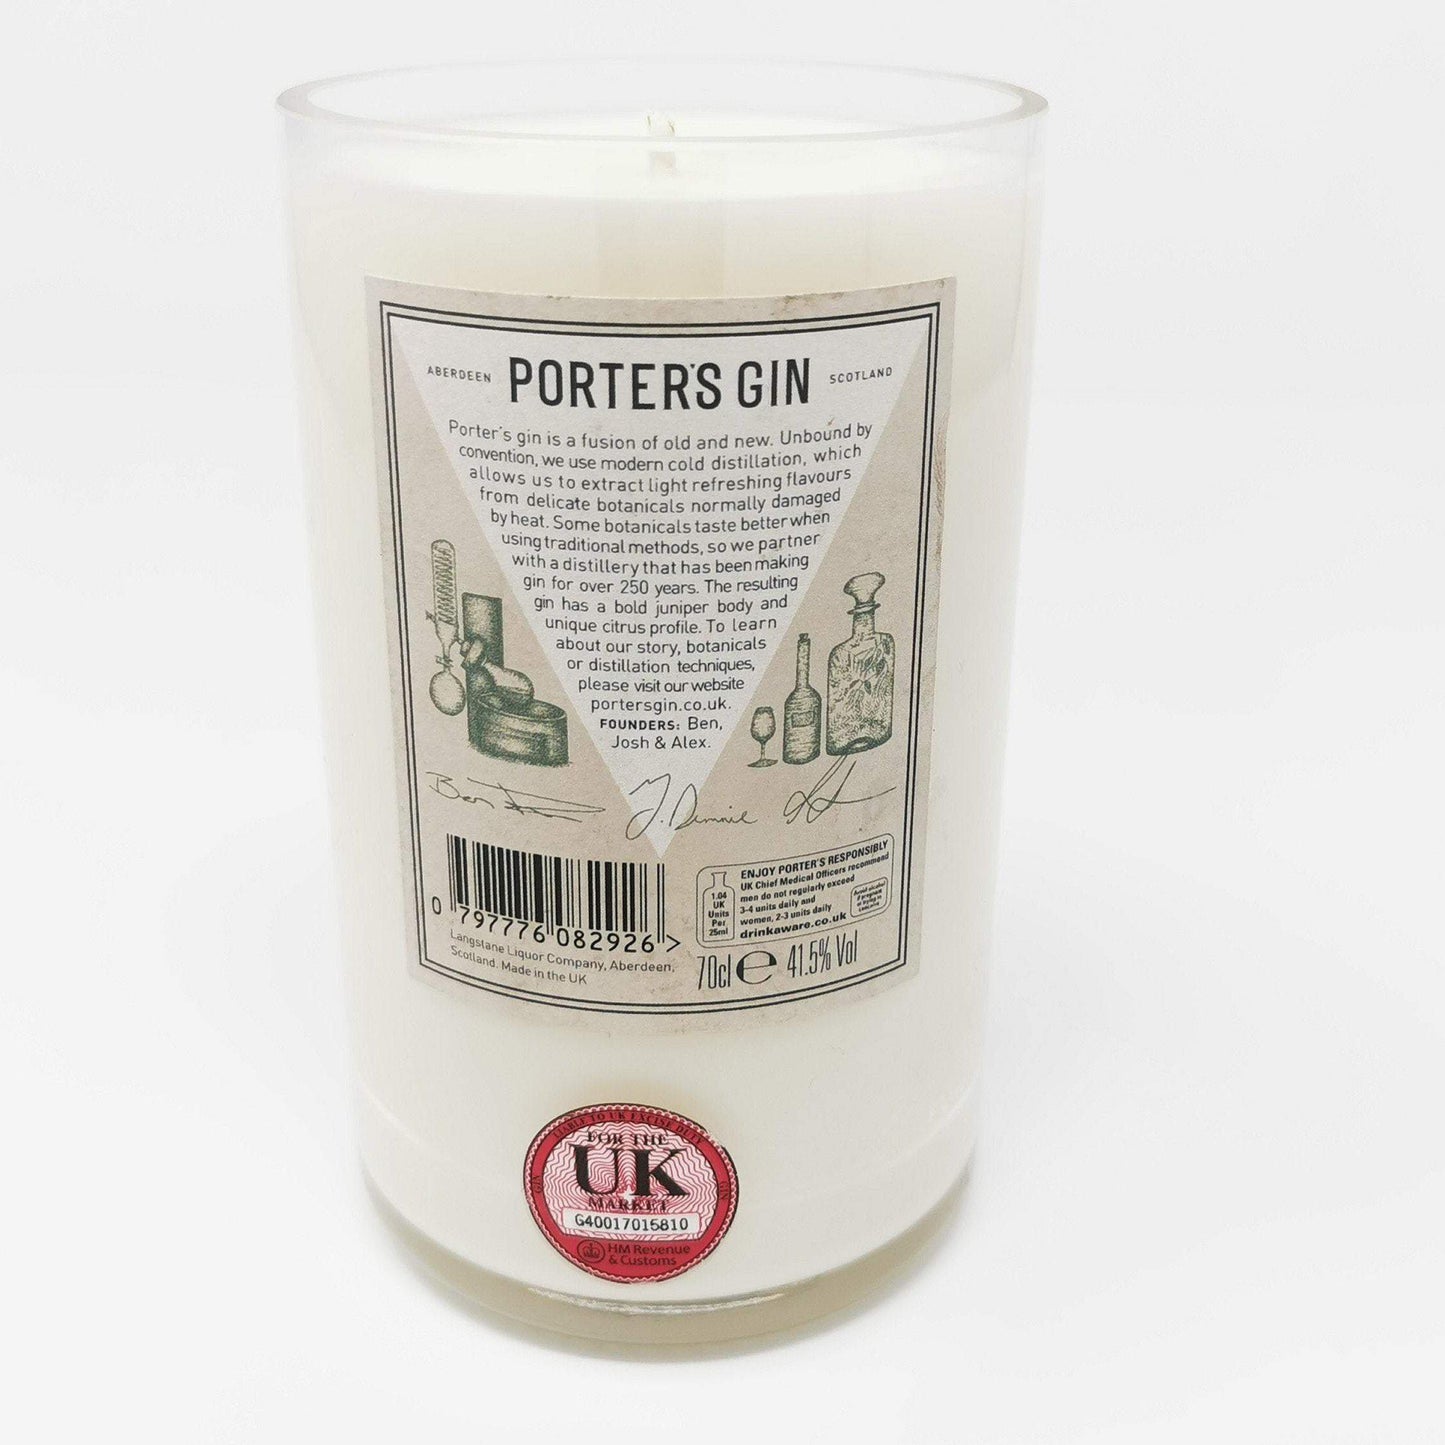 Porters Classic Gin Bottle Candle-Gin Bottle Candles-Adhock Homeware